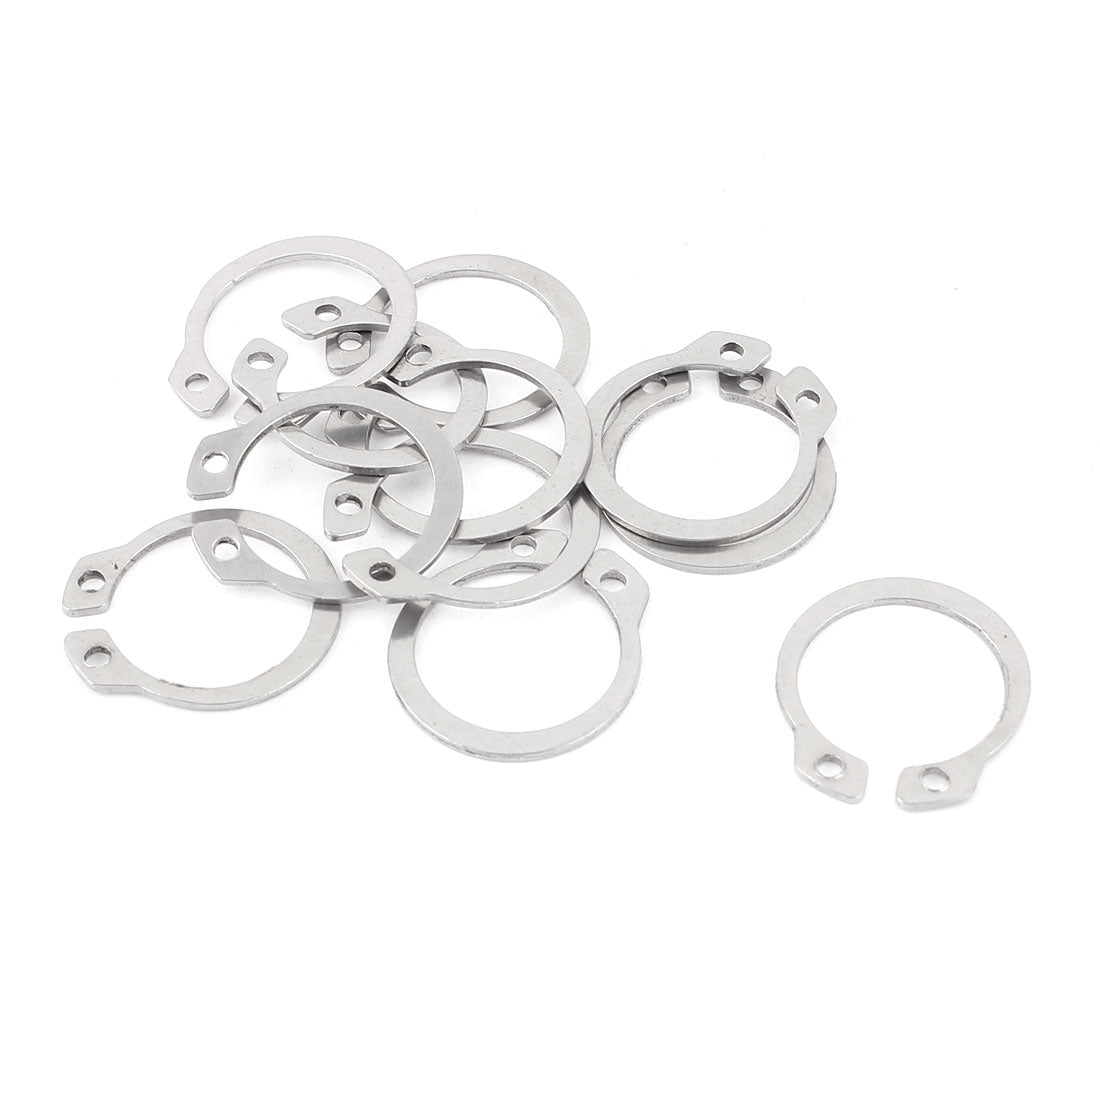 uxcell Uxcell 10pcs 304 Stainless Steel External Circlip Retaining Shaft Snap Rings 19mm